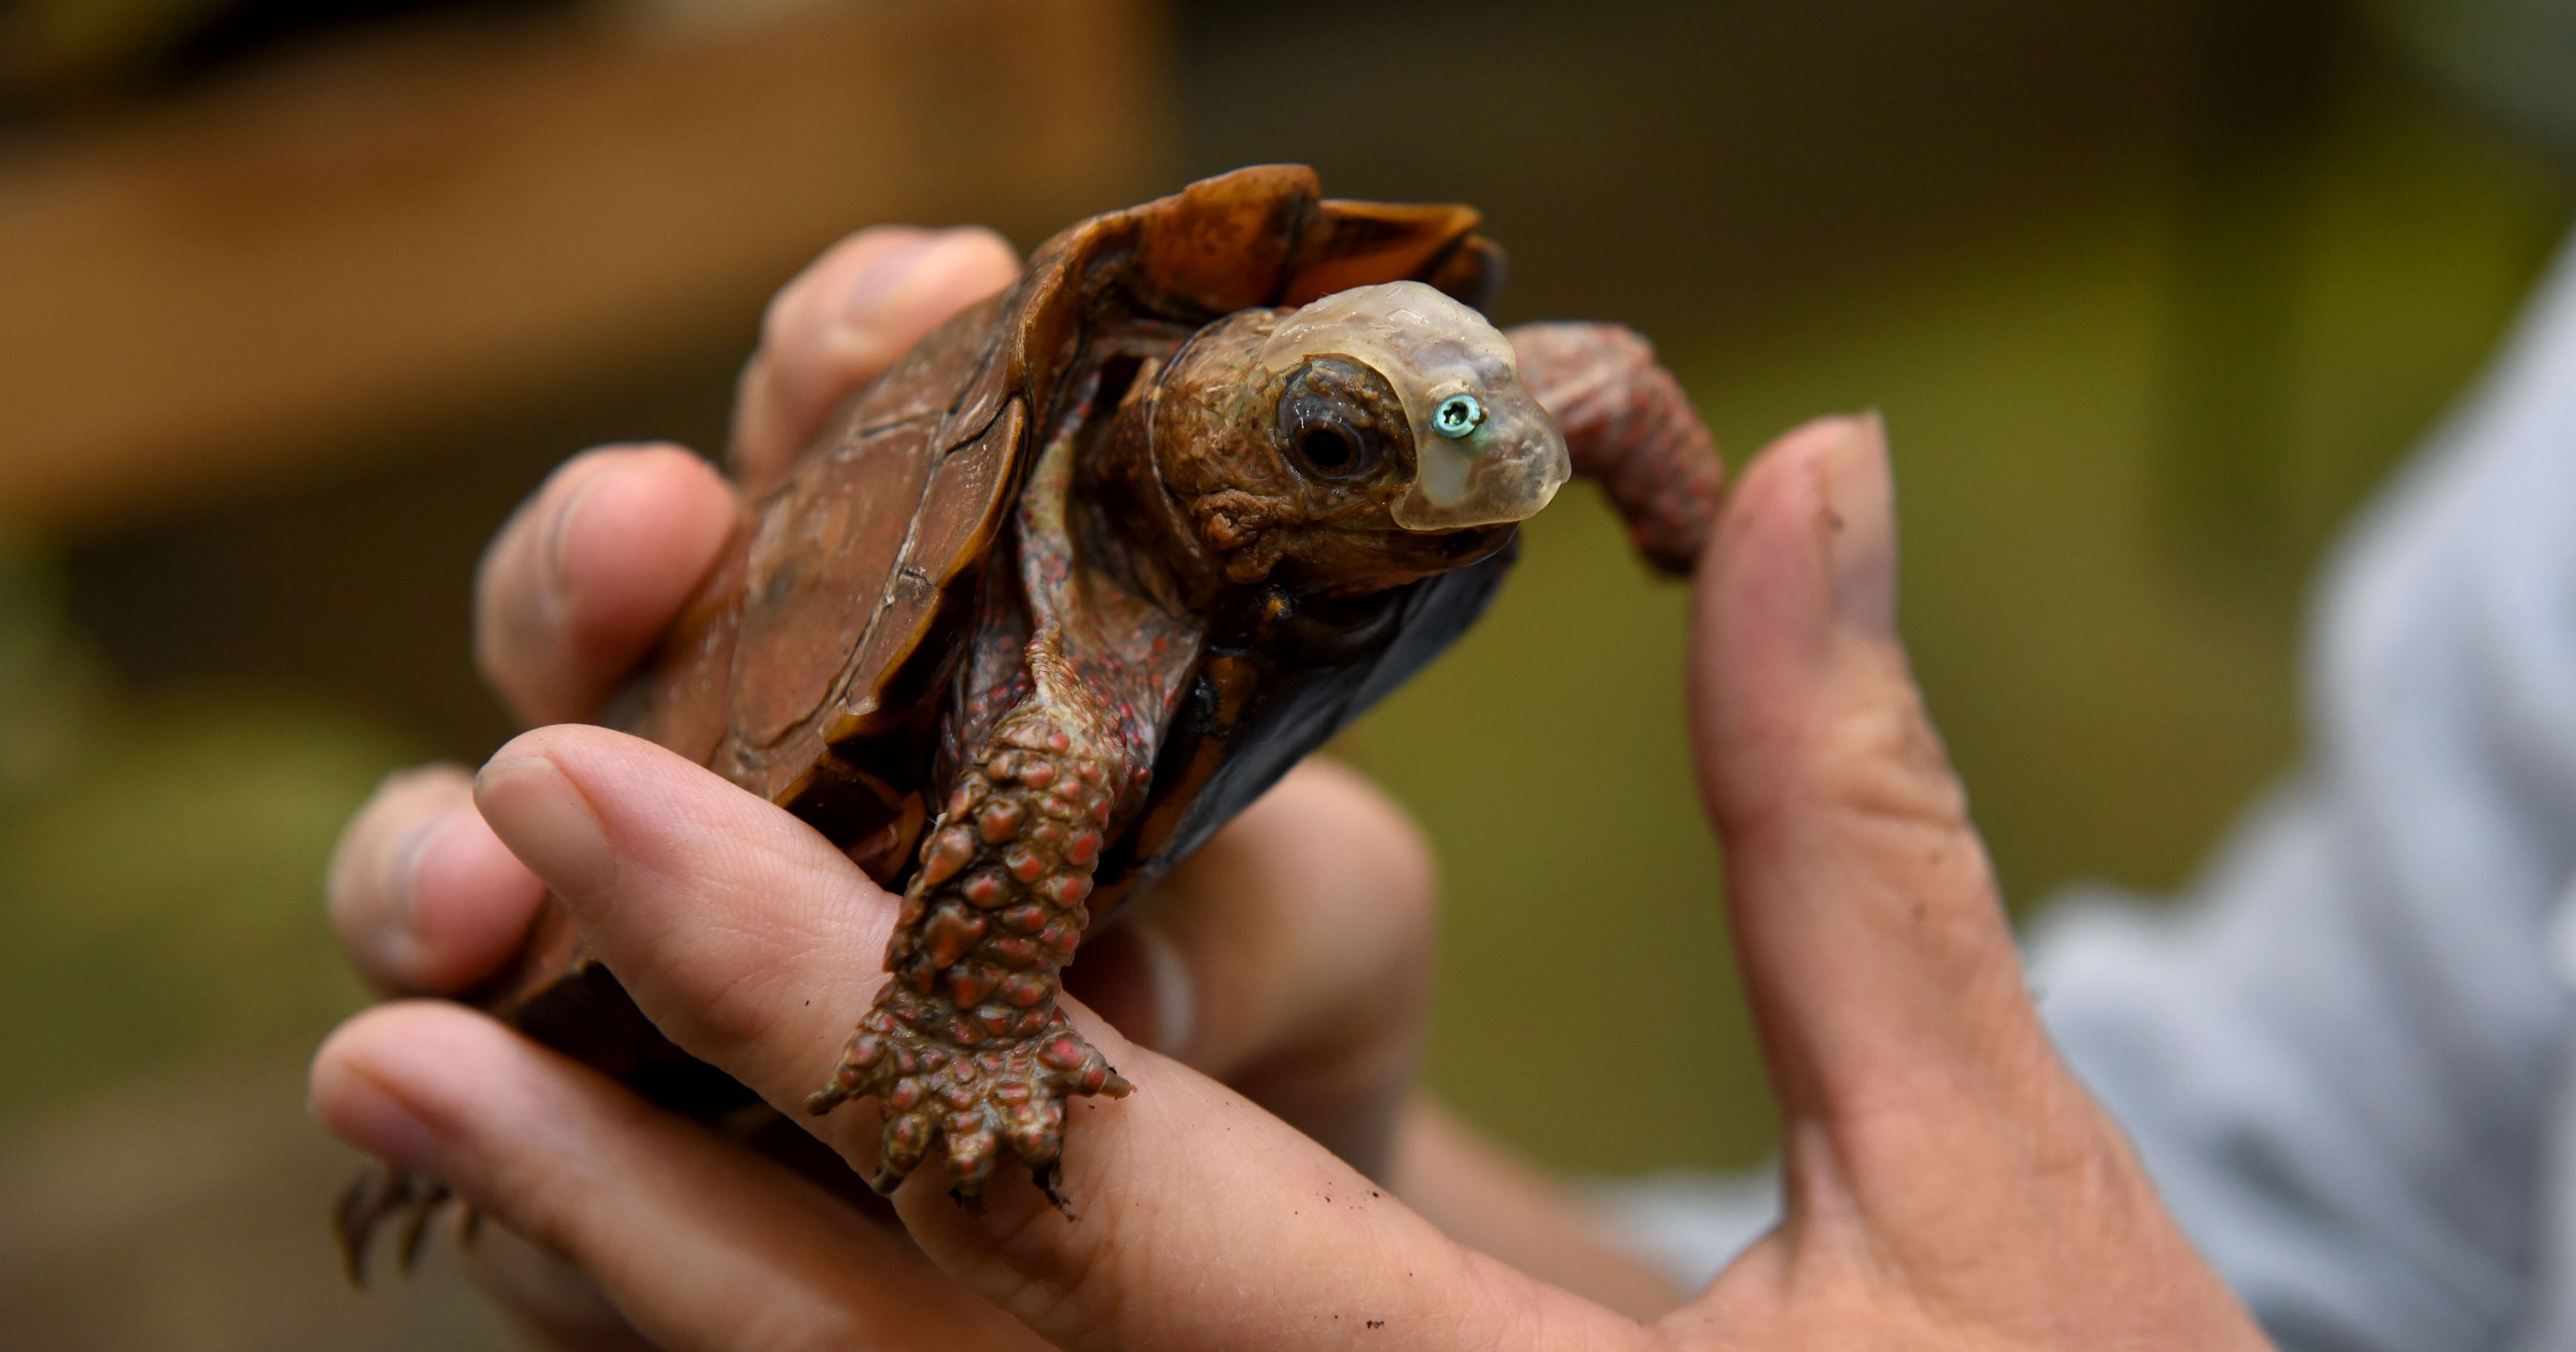 Tiny Zoo Knoxville turtle wears 3-D printed mask to cover hole in face